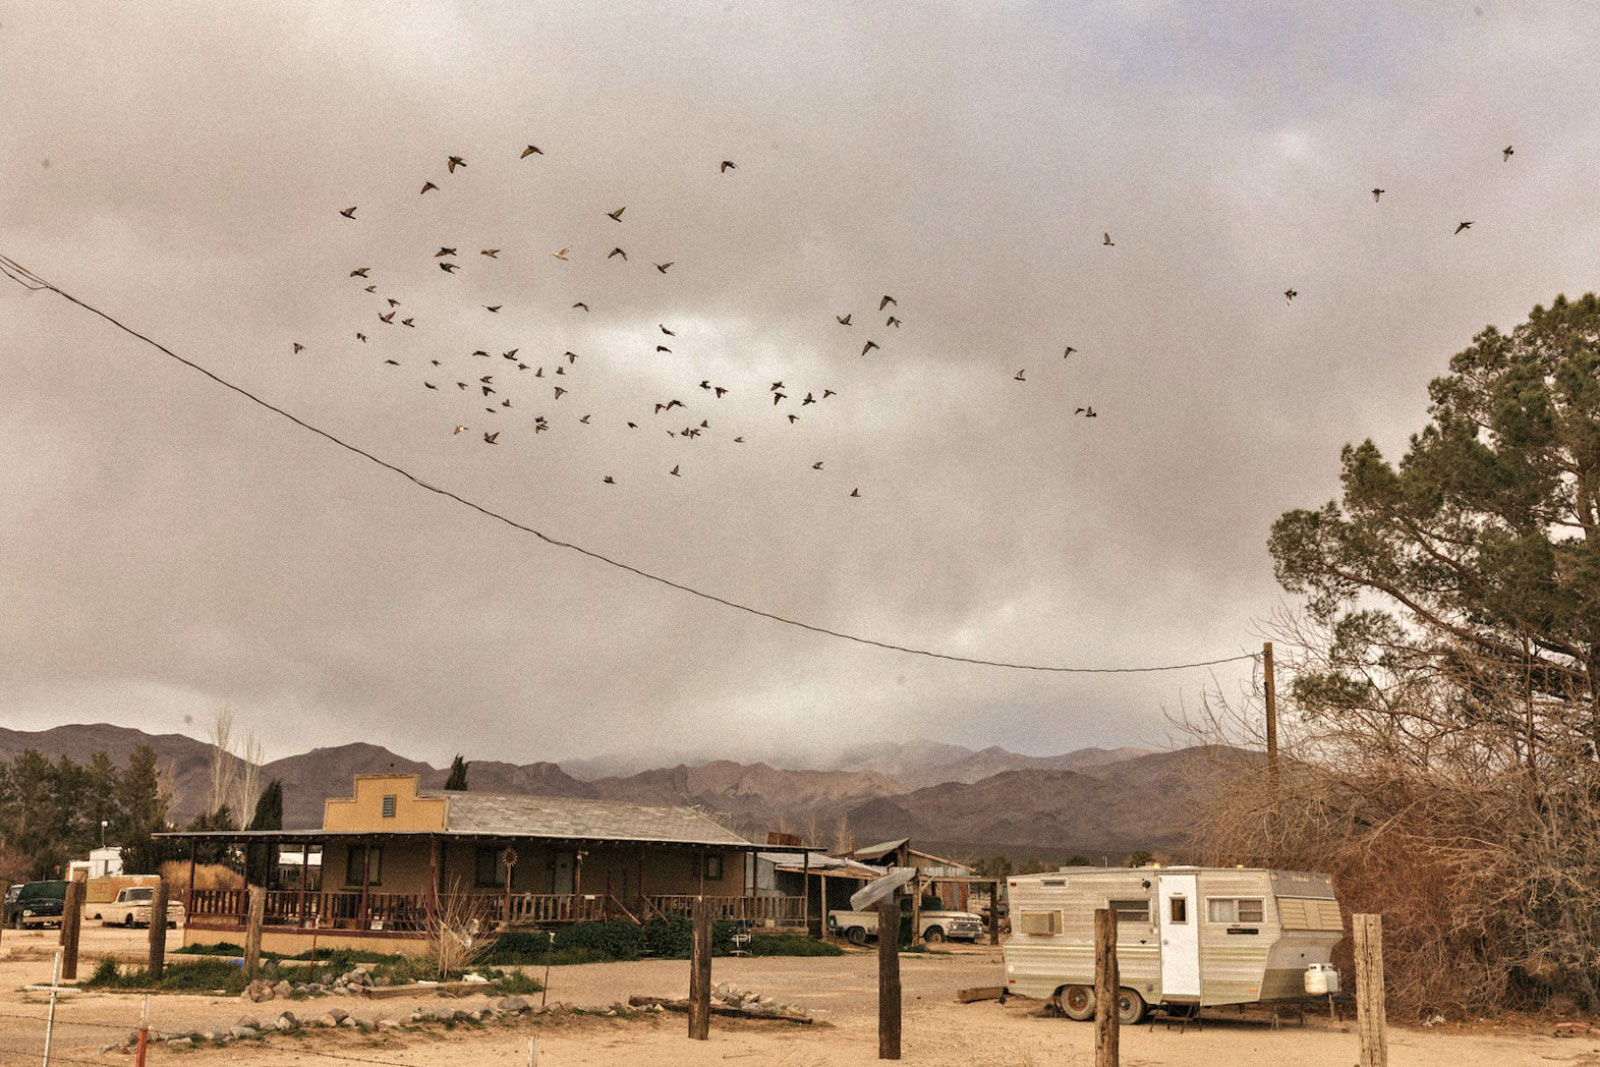 a flock of birds flies over a power line to a house with an RV outside